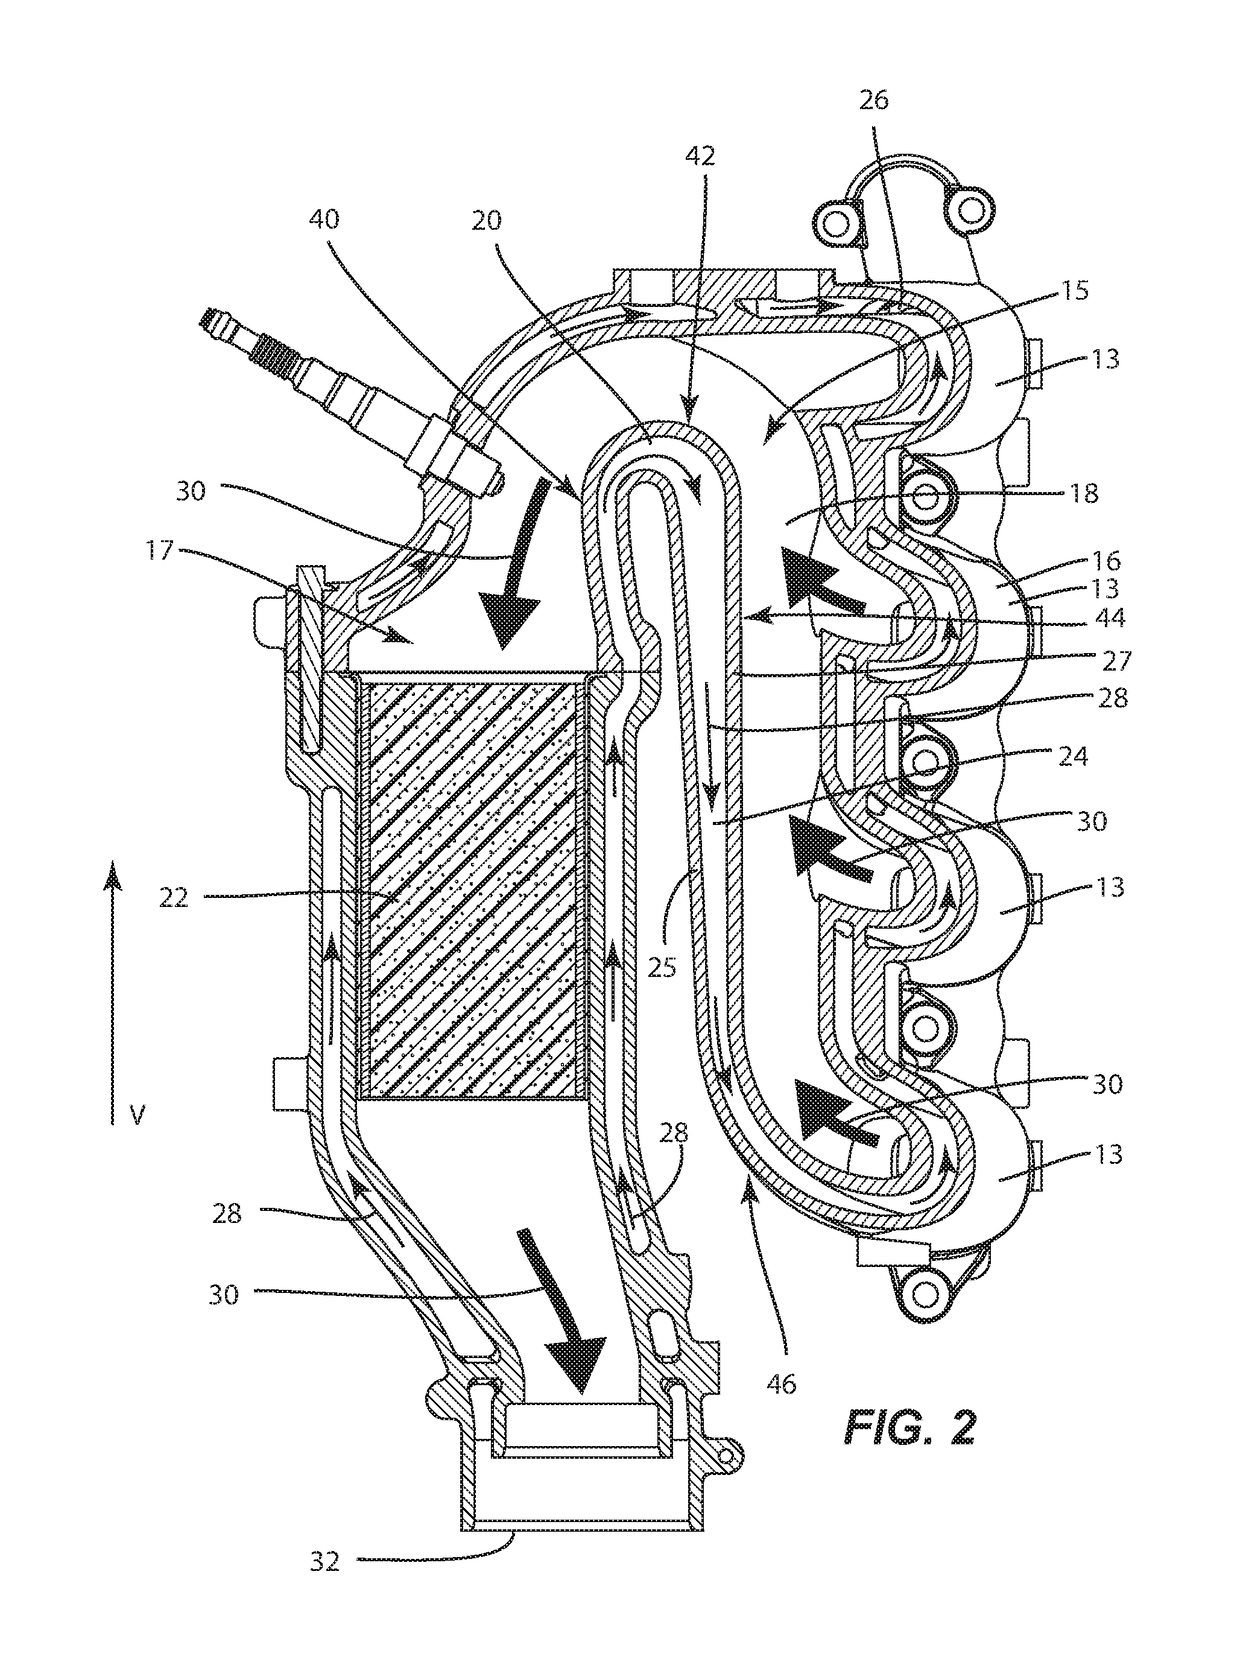 Converging cooling system cross section